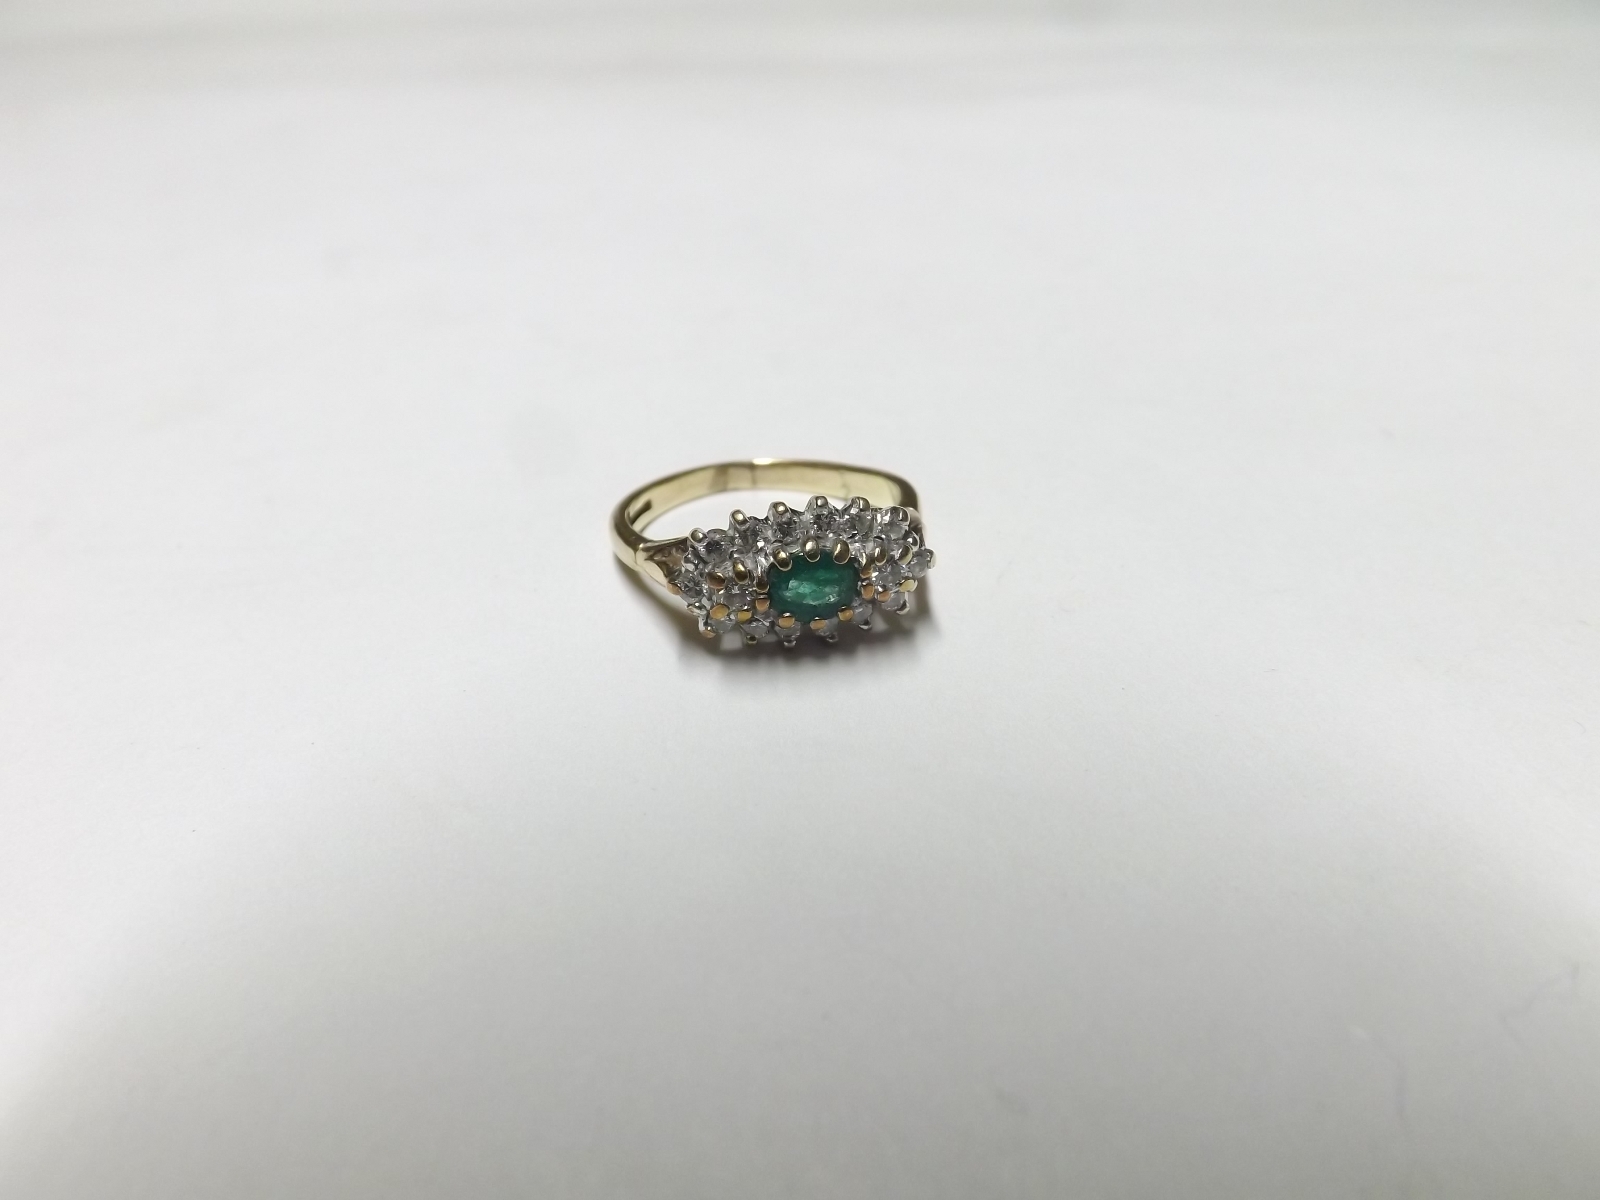 Hallmarked 9ct Gold Ring featuring a centre oval Emerald surrounded by small Brilliant Cut Diamonds